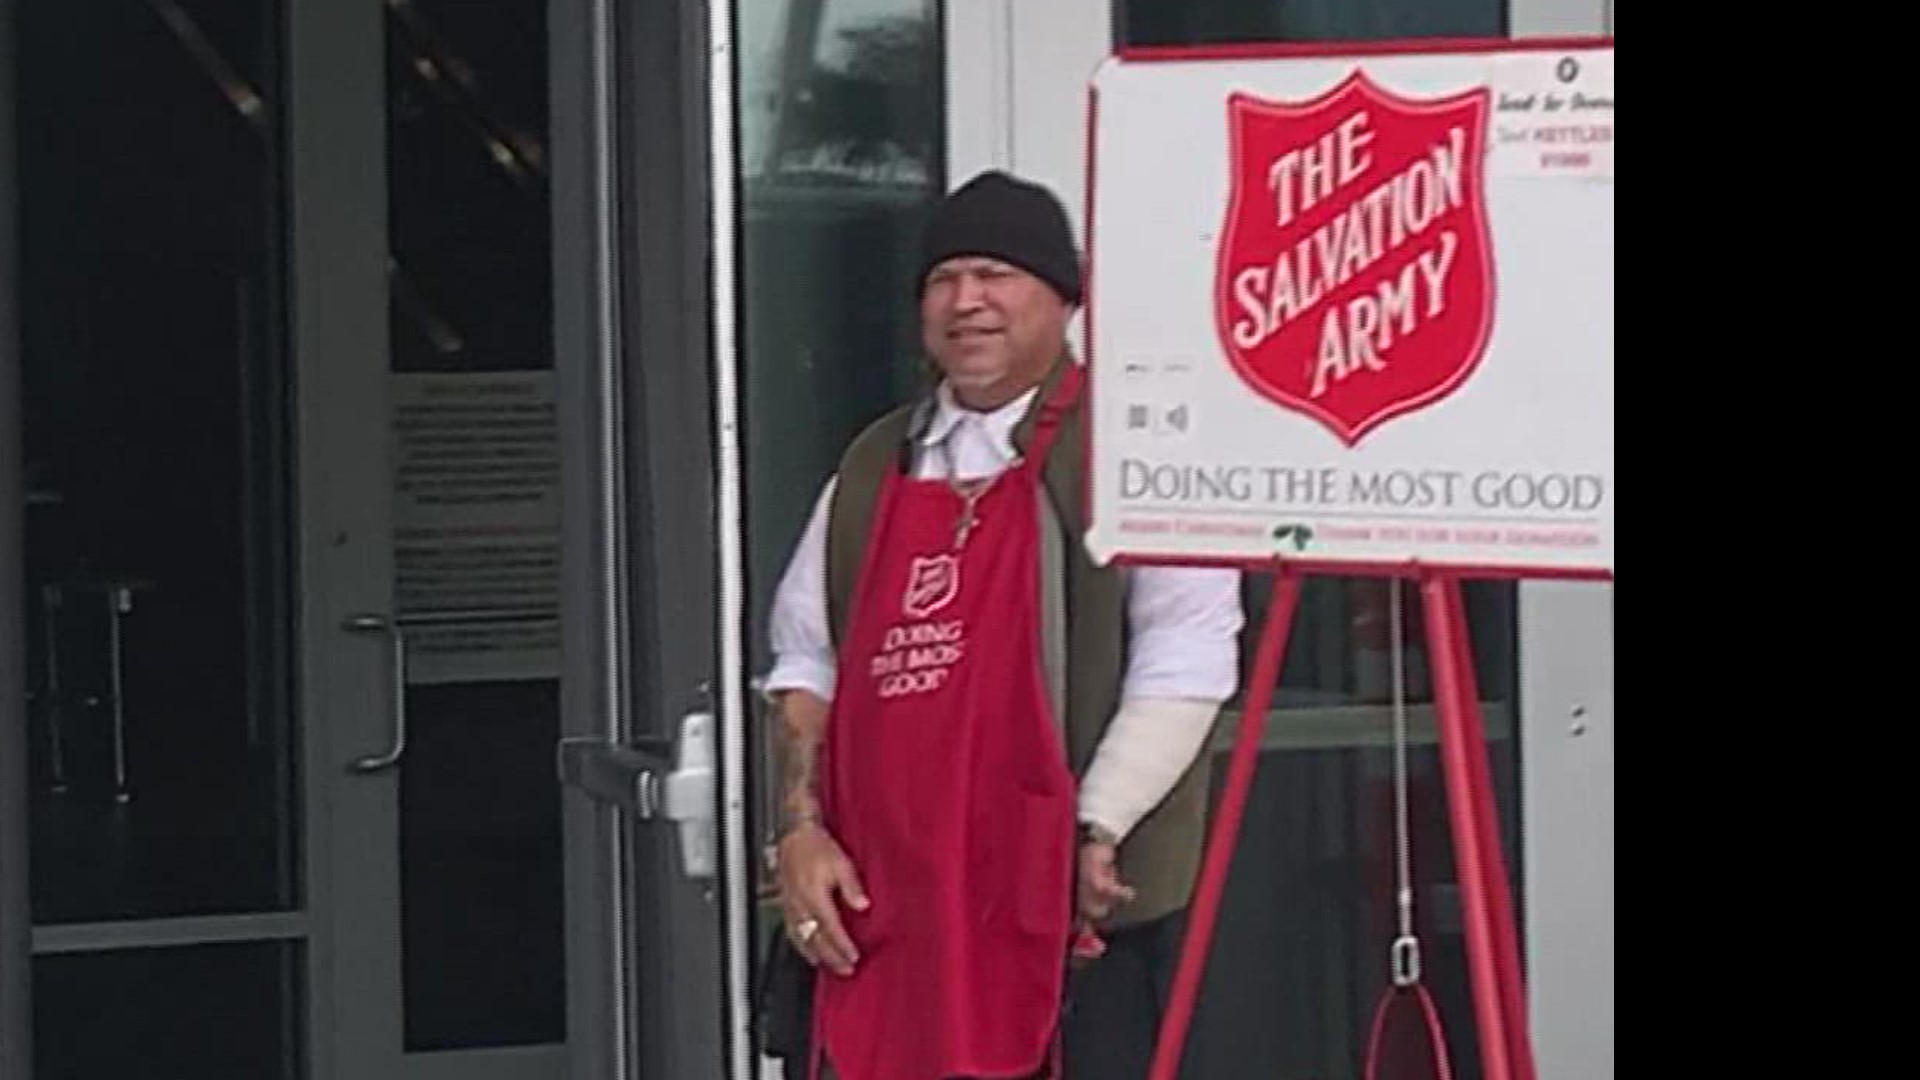 Officials with Salvation Army say their campaign needs at least 90 people a day to cover kettle locations.